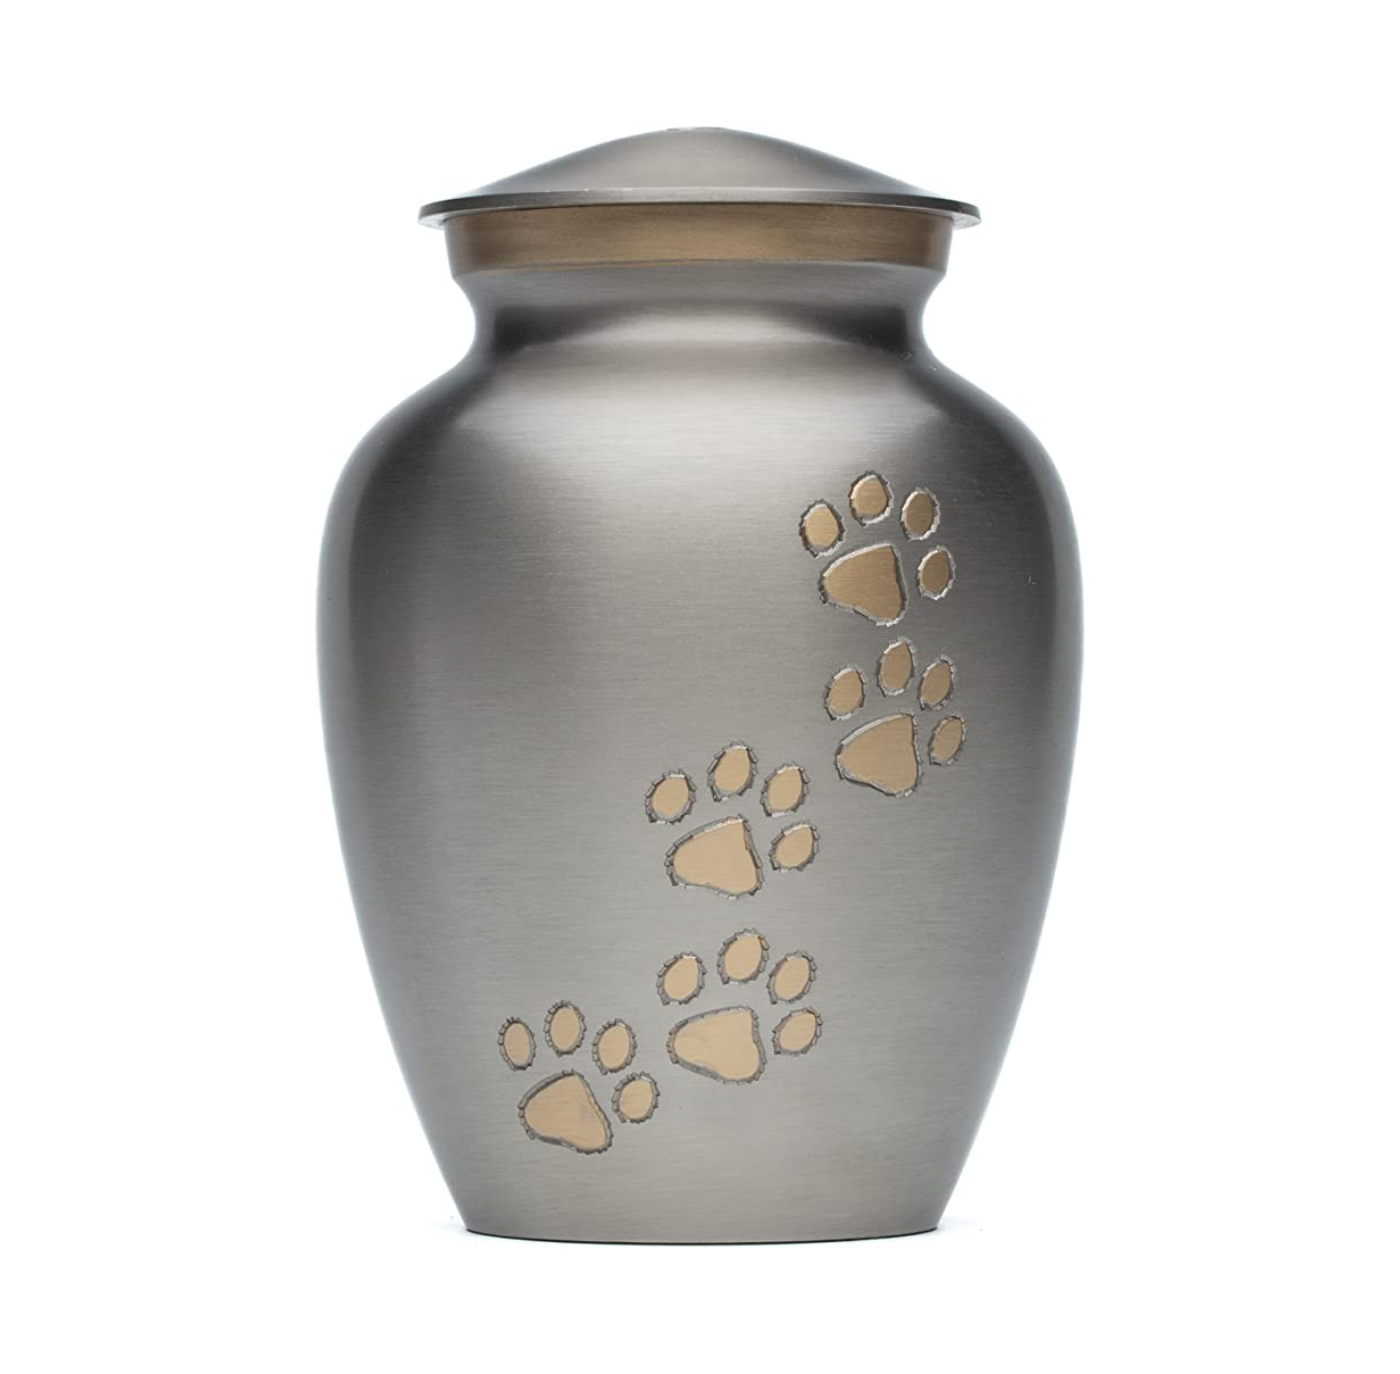 Elegant Pet Urn to Cherish Your Furry Friends Memories | Pewter Matte Gold Finish | Small 6 inch Urn | Hand Carved Golden Paws on Brass Urn with a Gold Neck to Highlight The Beauty of The Urn